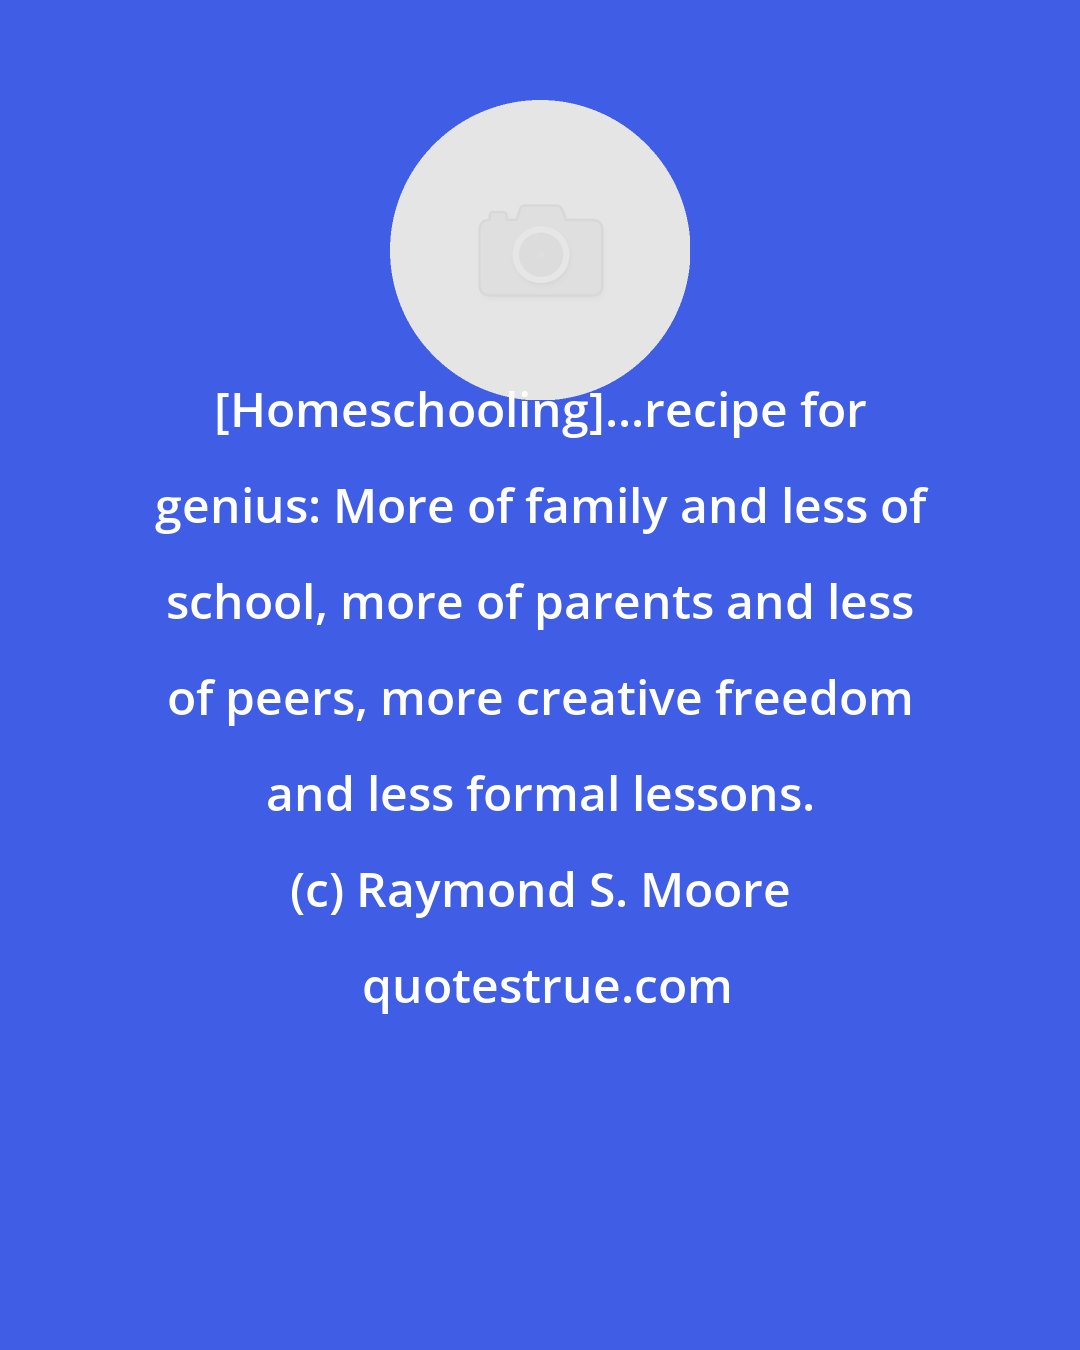 Raymond S. Moore: [Homeschooling]...recipe for genius: More of family and less of school, more of parents and less of peers, more creative freedom and less formal lessons.